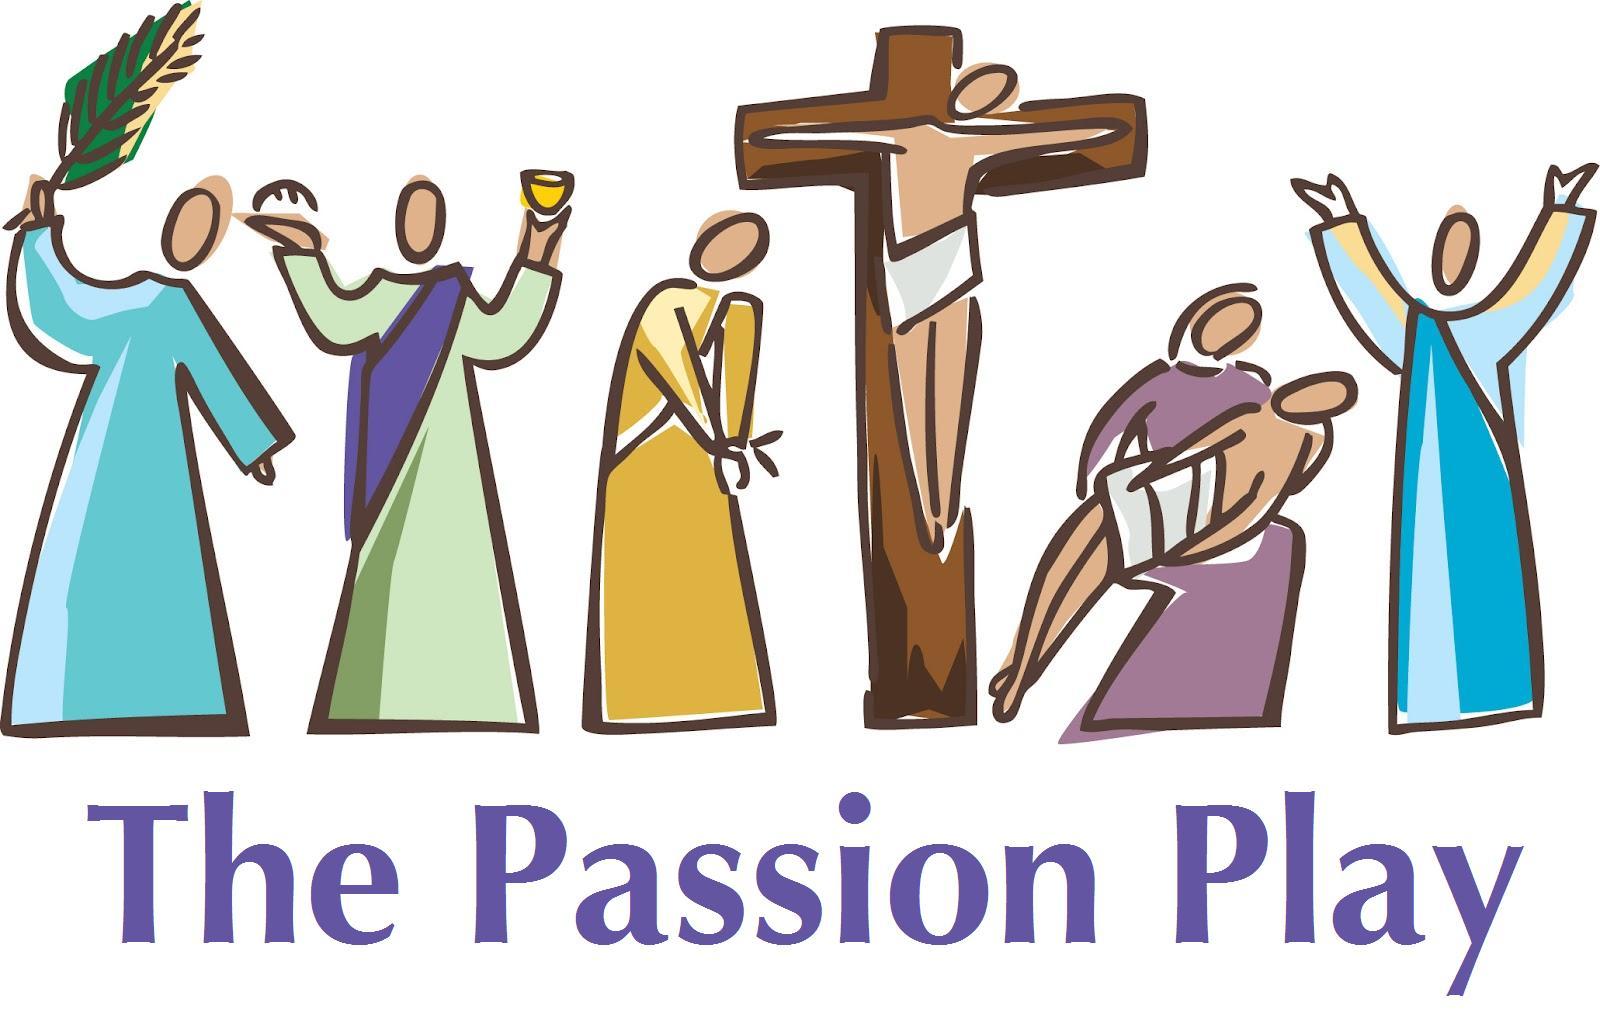 Passion play clipart 